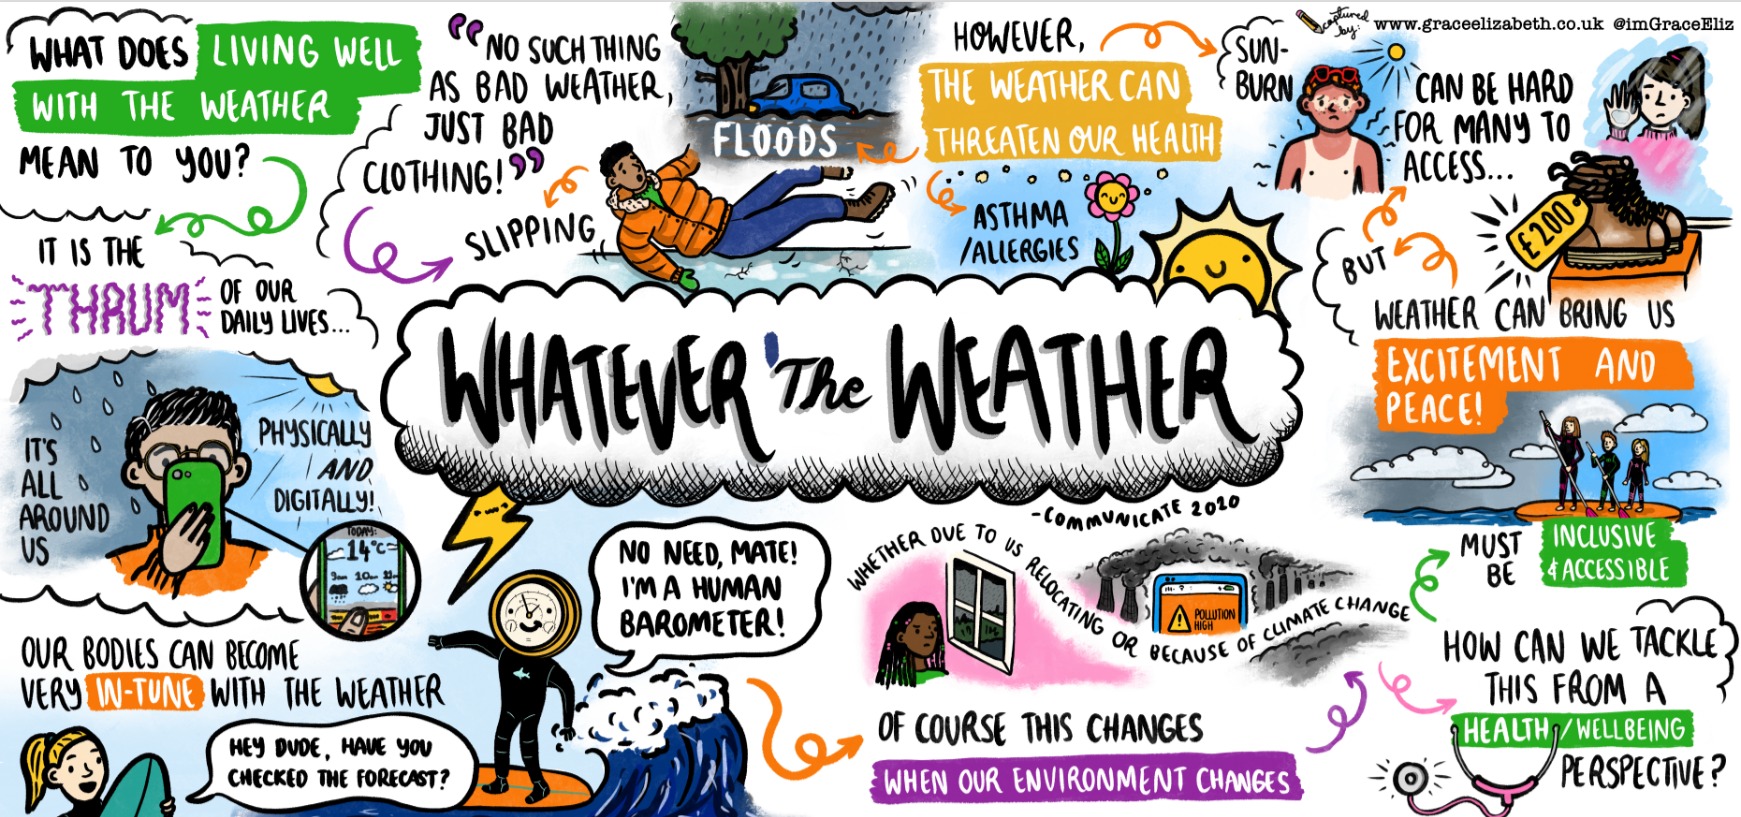 Sketchnote reflecting on what weather means to us